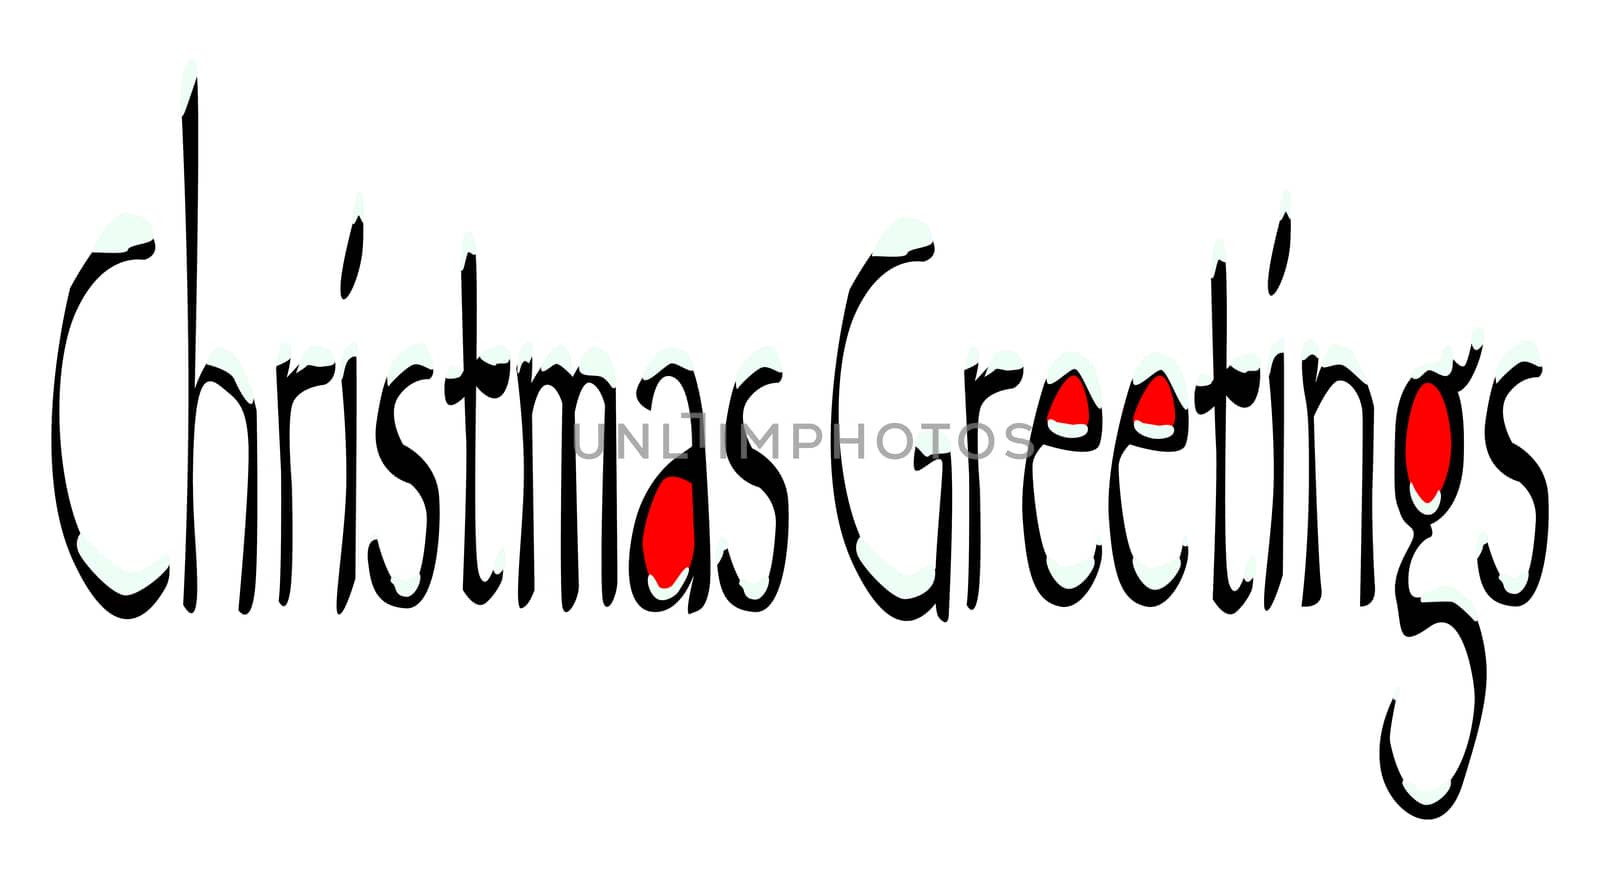 The text 'Christmas Greetings' in an original snow capped text.